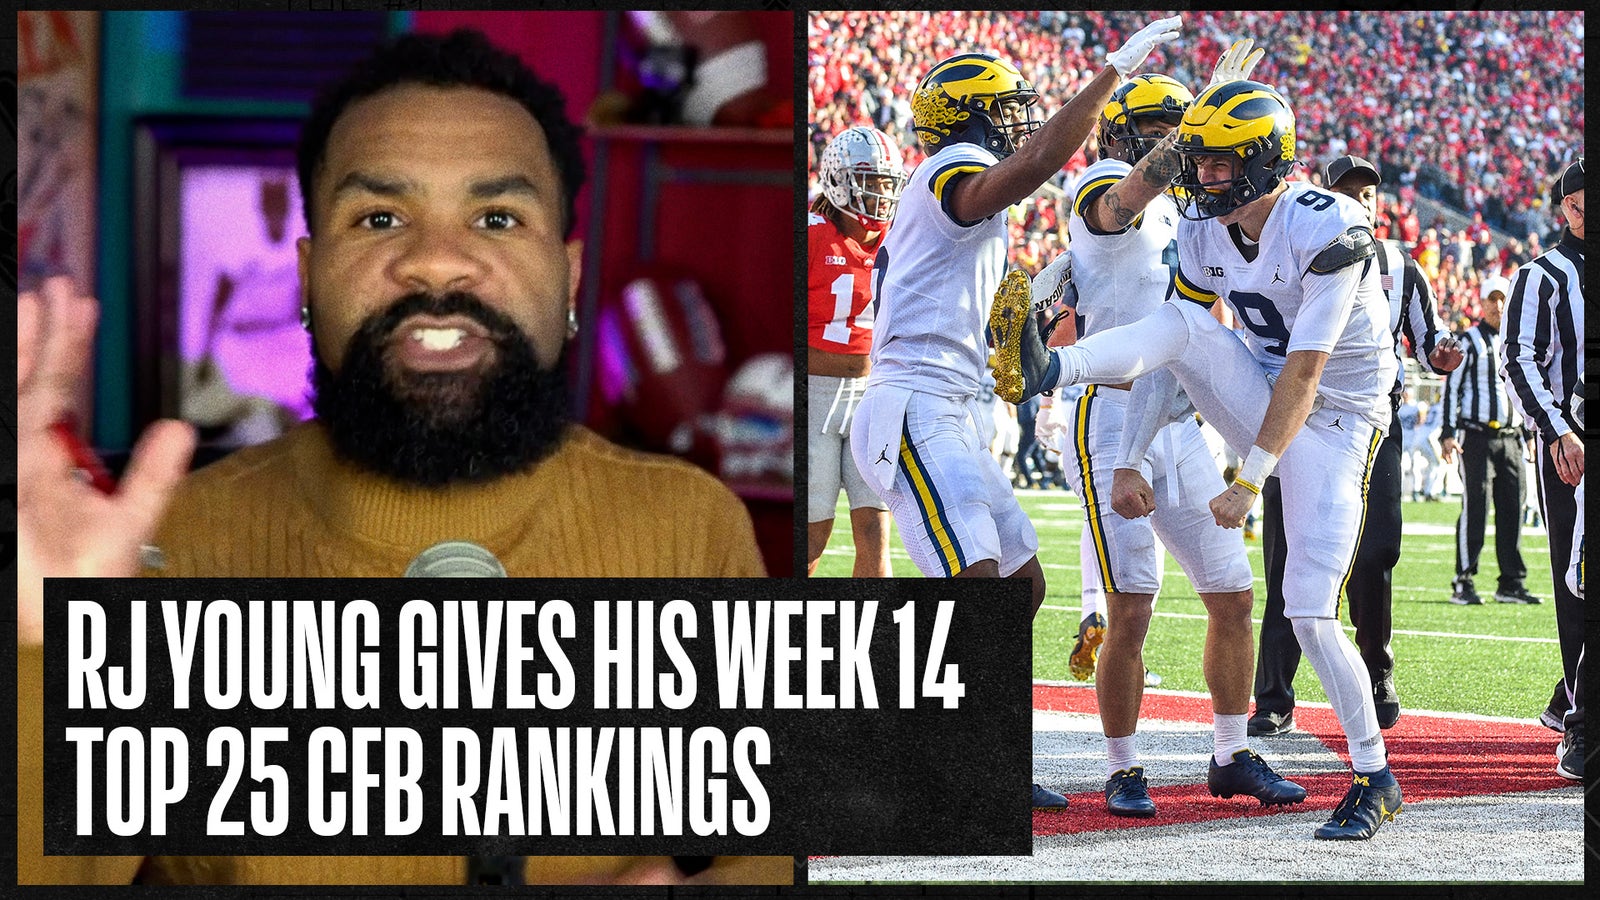 RJ Young's Top 25: Michigan moves up to No. 2